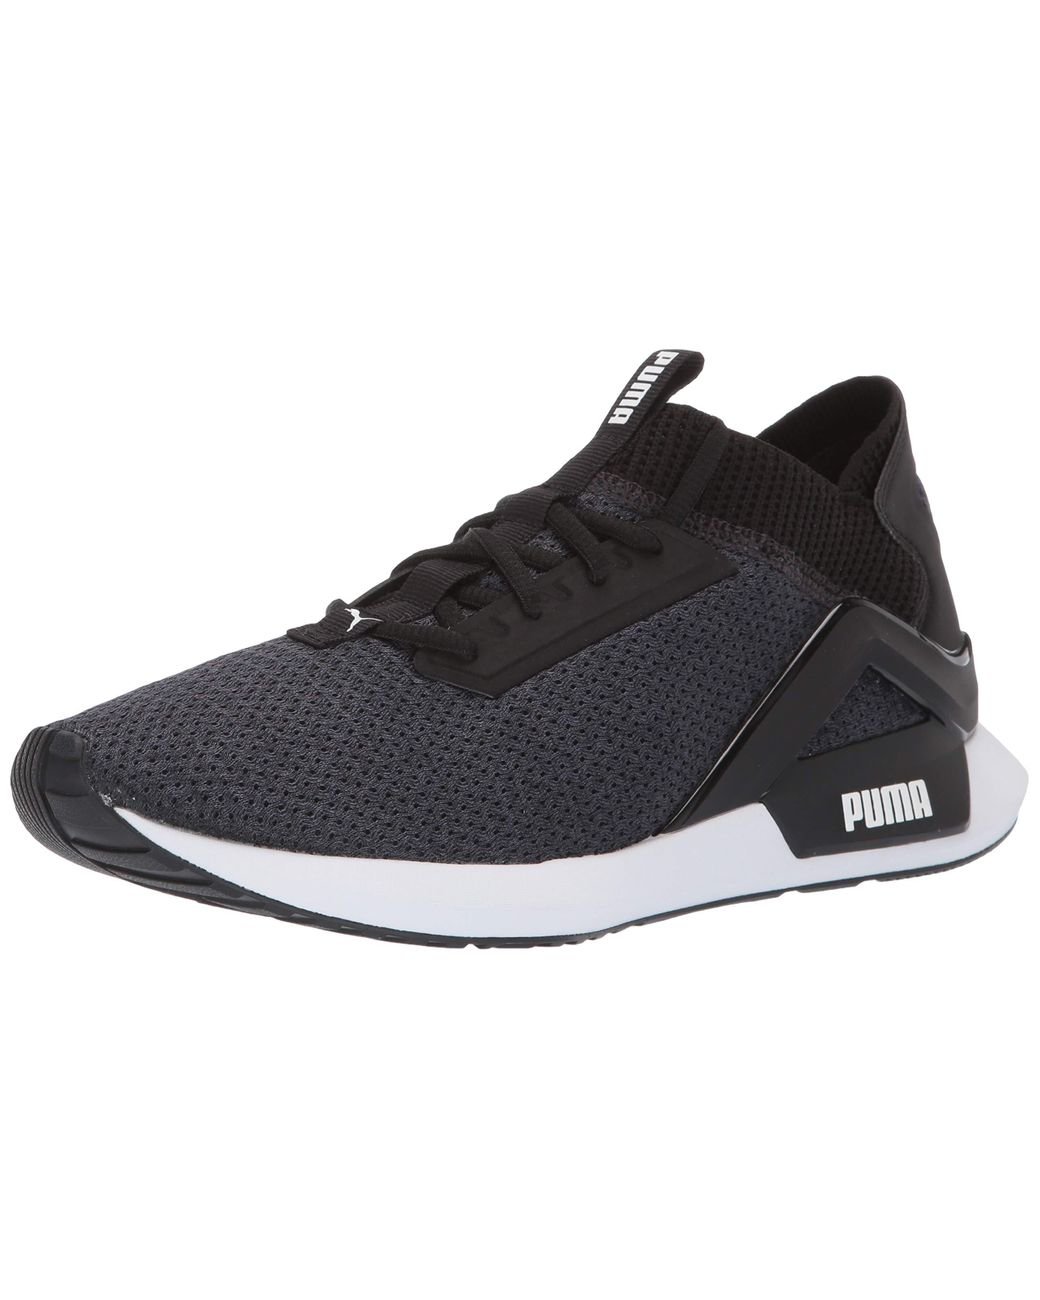 PUMA Rogue Sneaker in Black for Men - Save 7% - Lyst